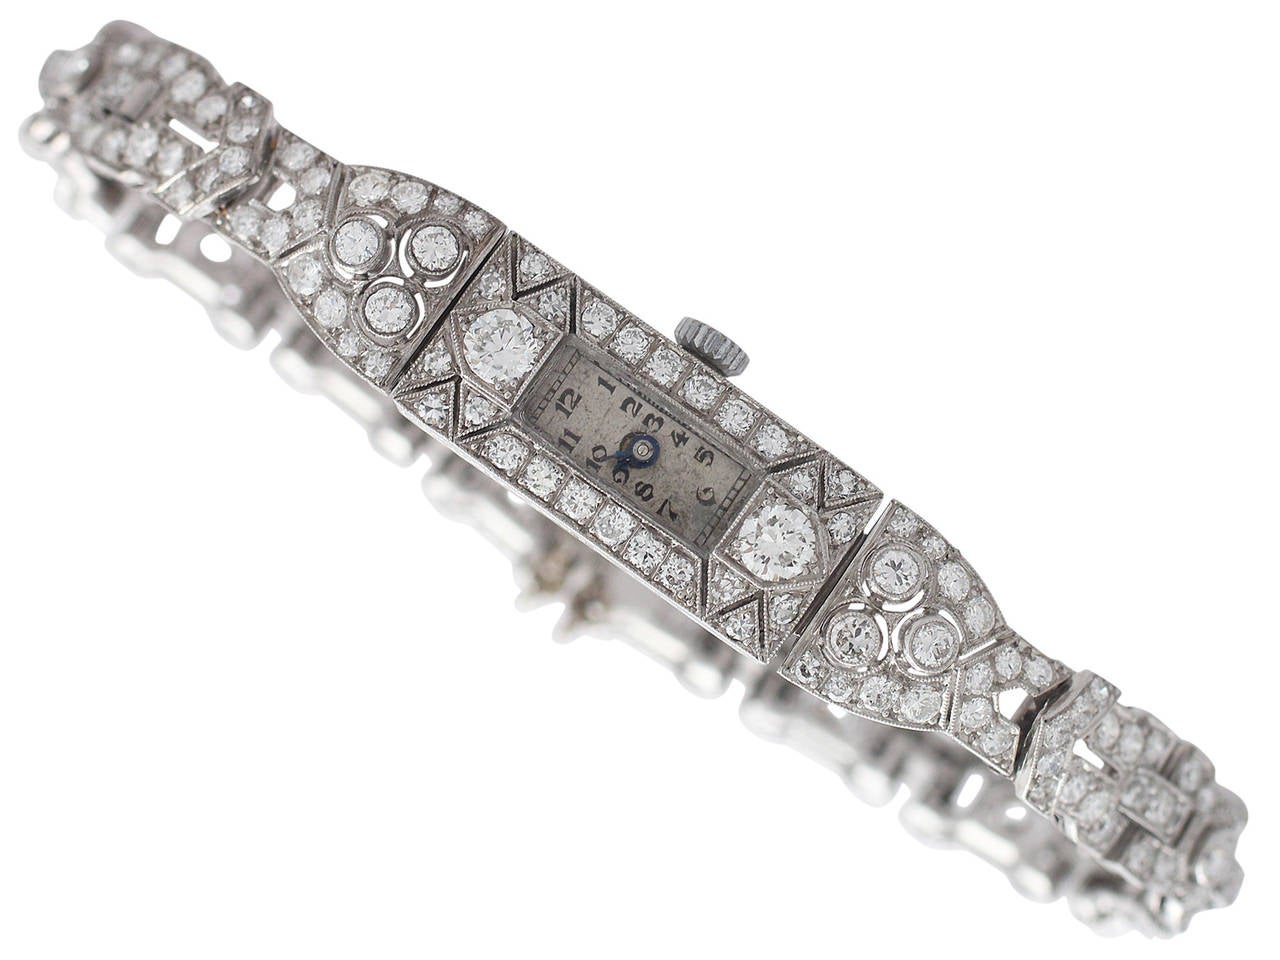 A stunning, fine and impressive 6.70 carat diamond and platinum vintage Art Deco style cocktail watch; part of our diamond jewelry and estate jewelry collections

This stunning vintage diamond Art Deco cocktail watch has been crafted in